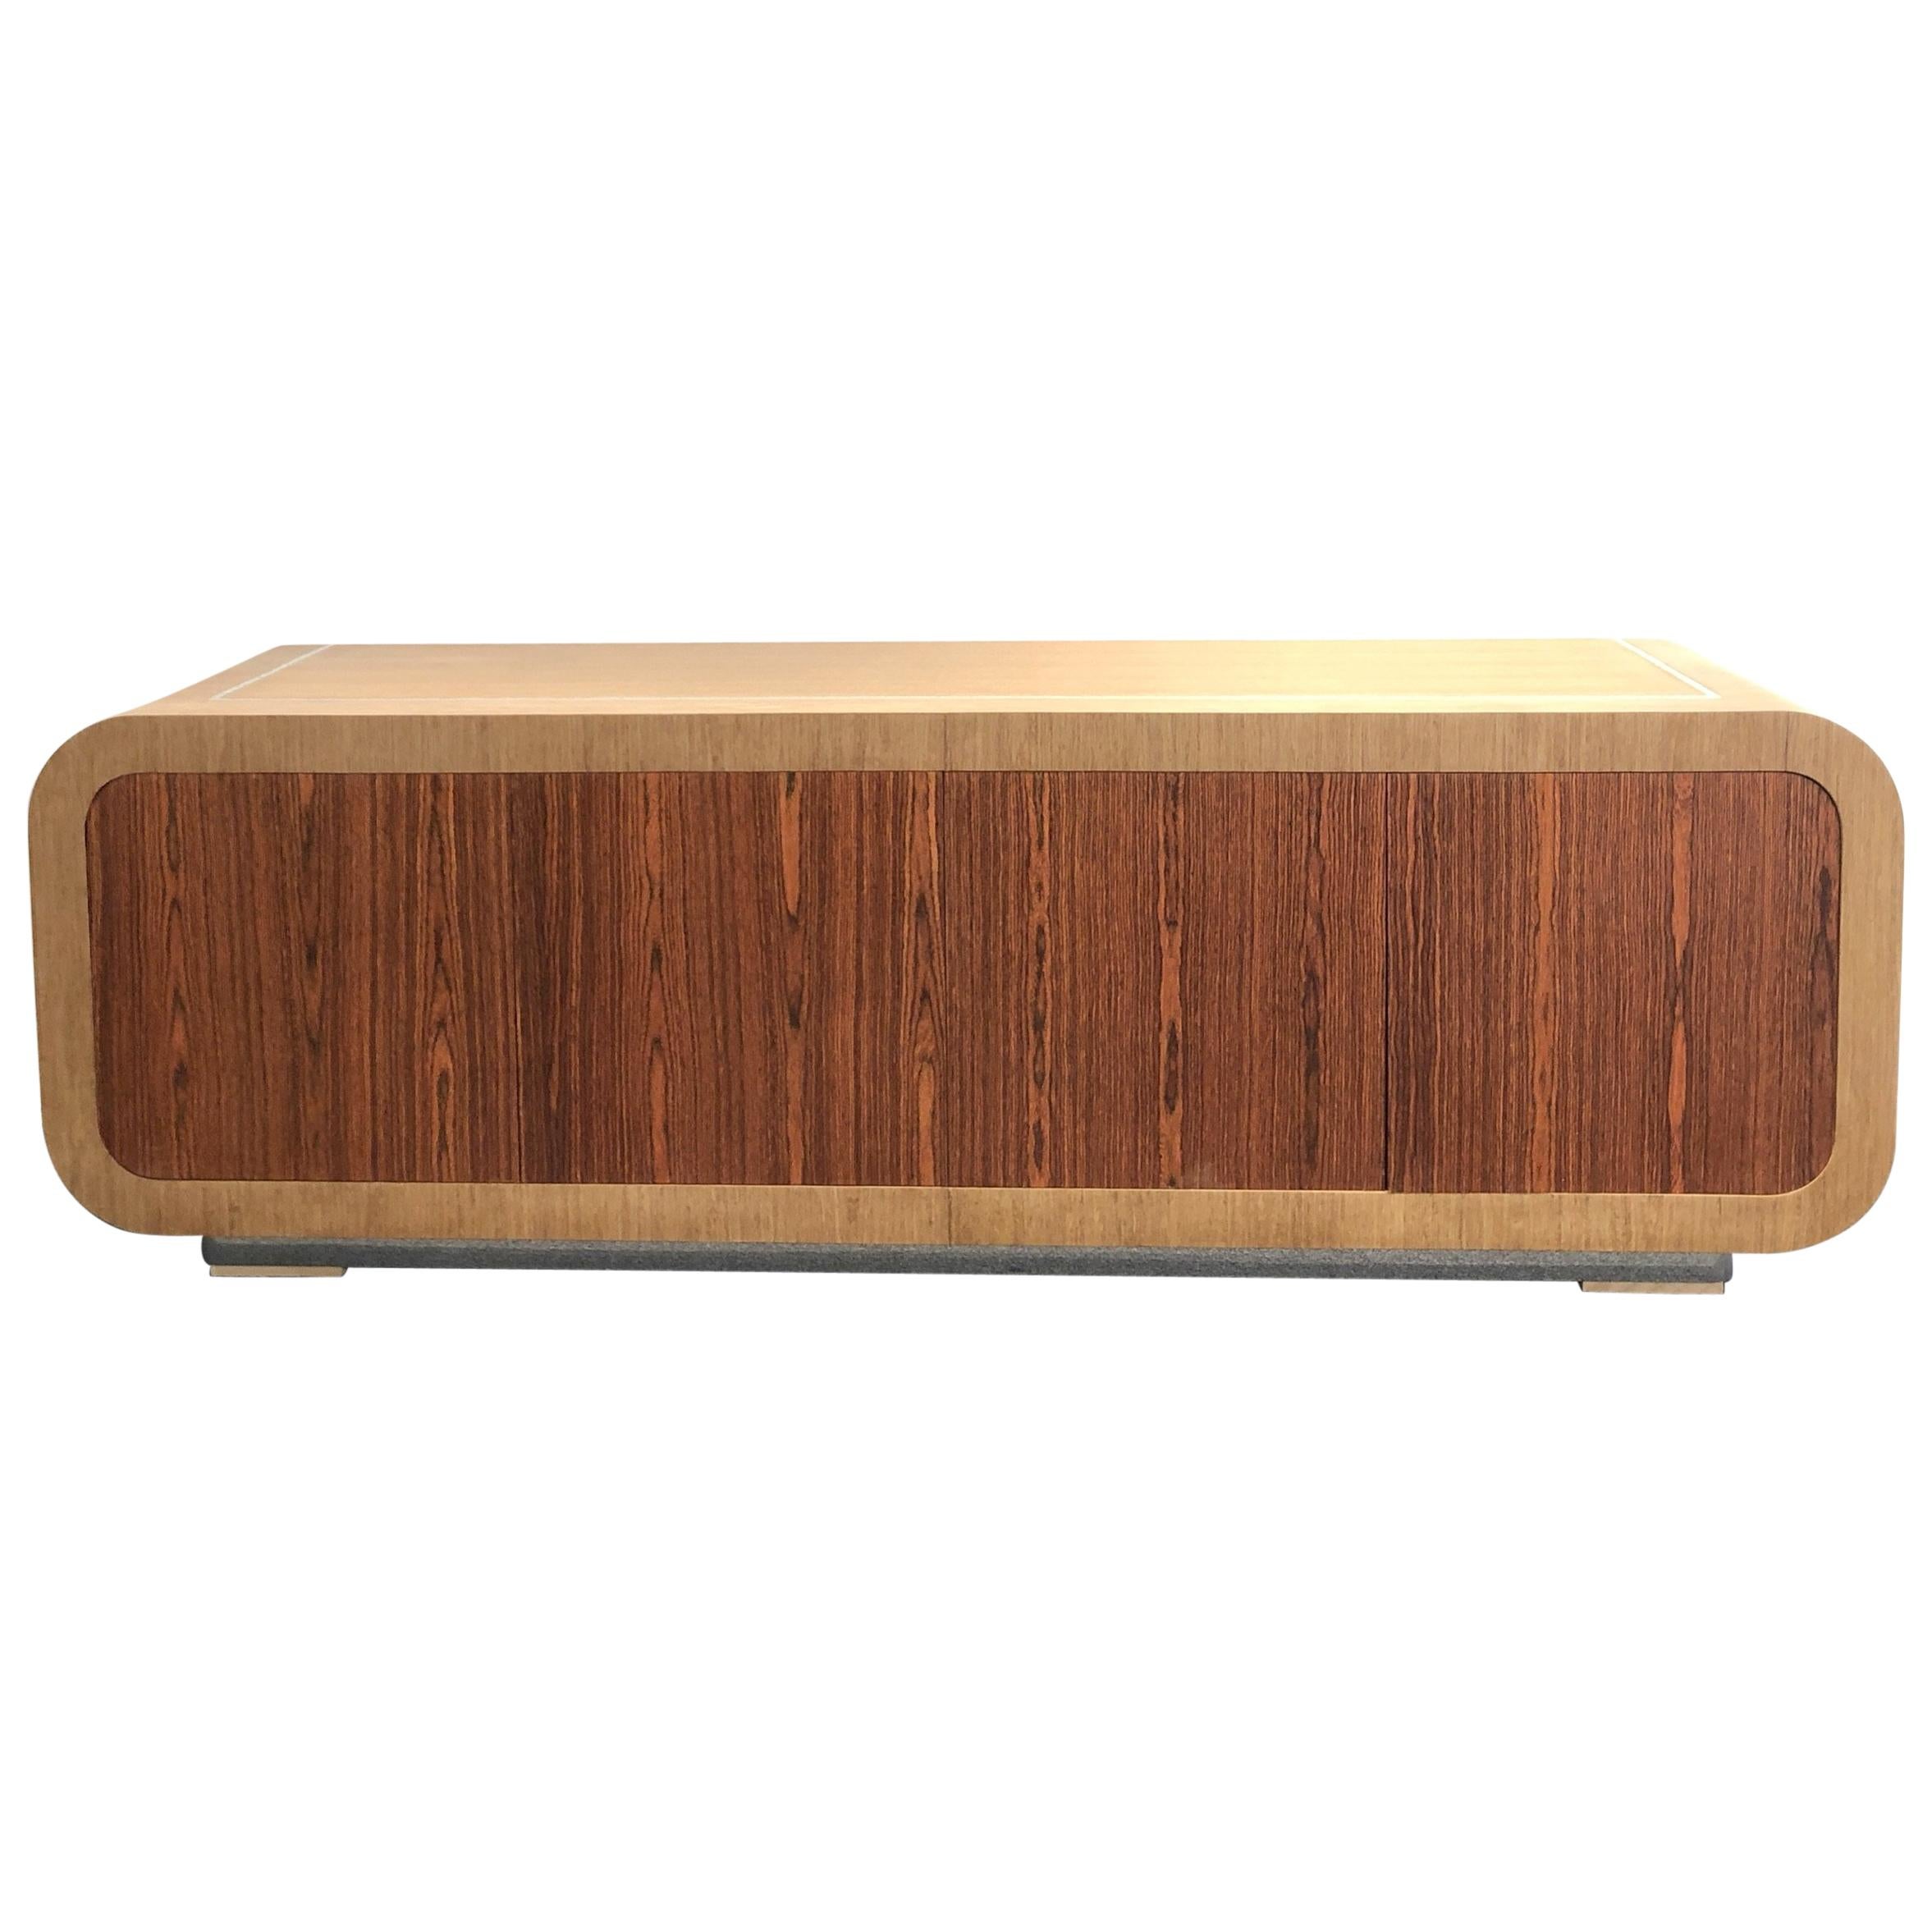 Oak and Rosewood Credeza by Steve Chase